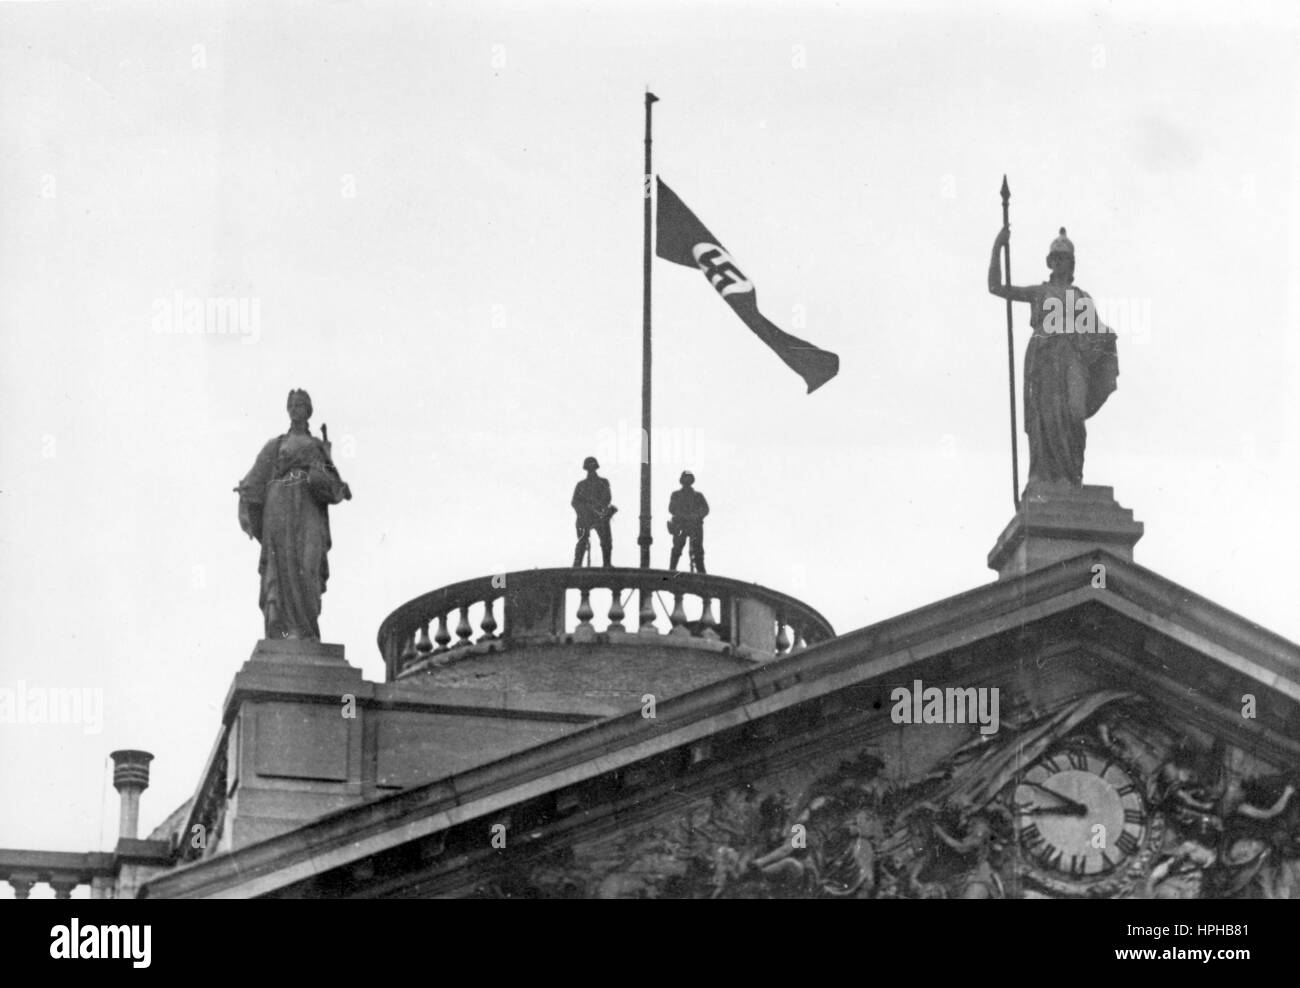 The Nazi propaganda image shows German Wehrmacht soldiers next to a raised Swastika flag on the roof of the Belgian Royal Palace of Laeken in occupied Brussels, Belgium. Taken in May 1940. Fotoarchiv für Zeitgeschichte - NO WIRE SERVICE - | usage worldwide Stock Photo